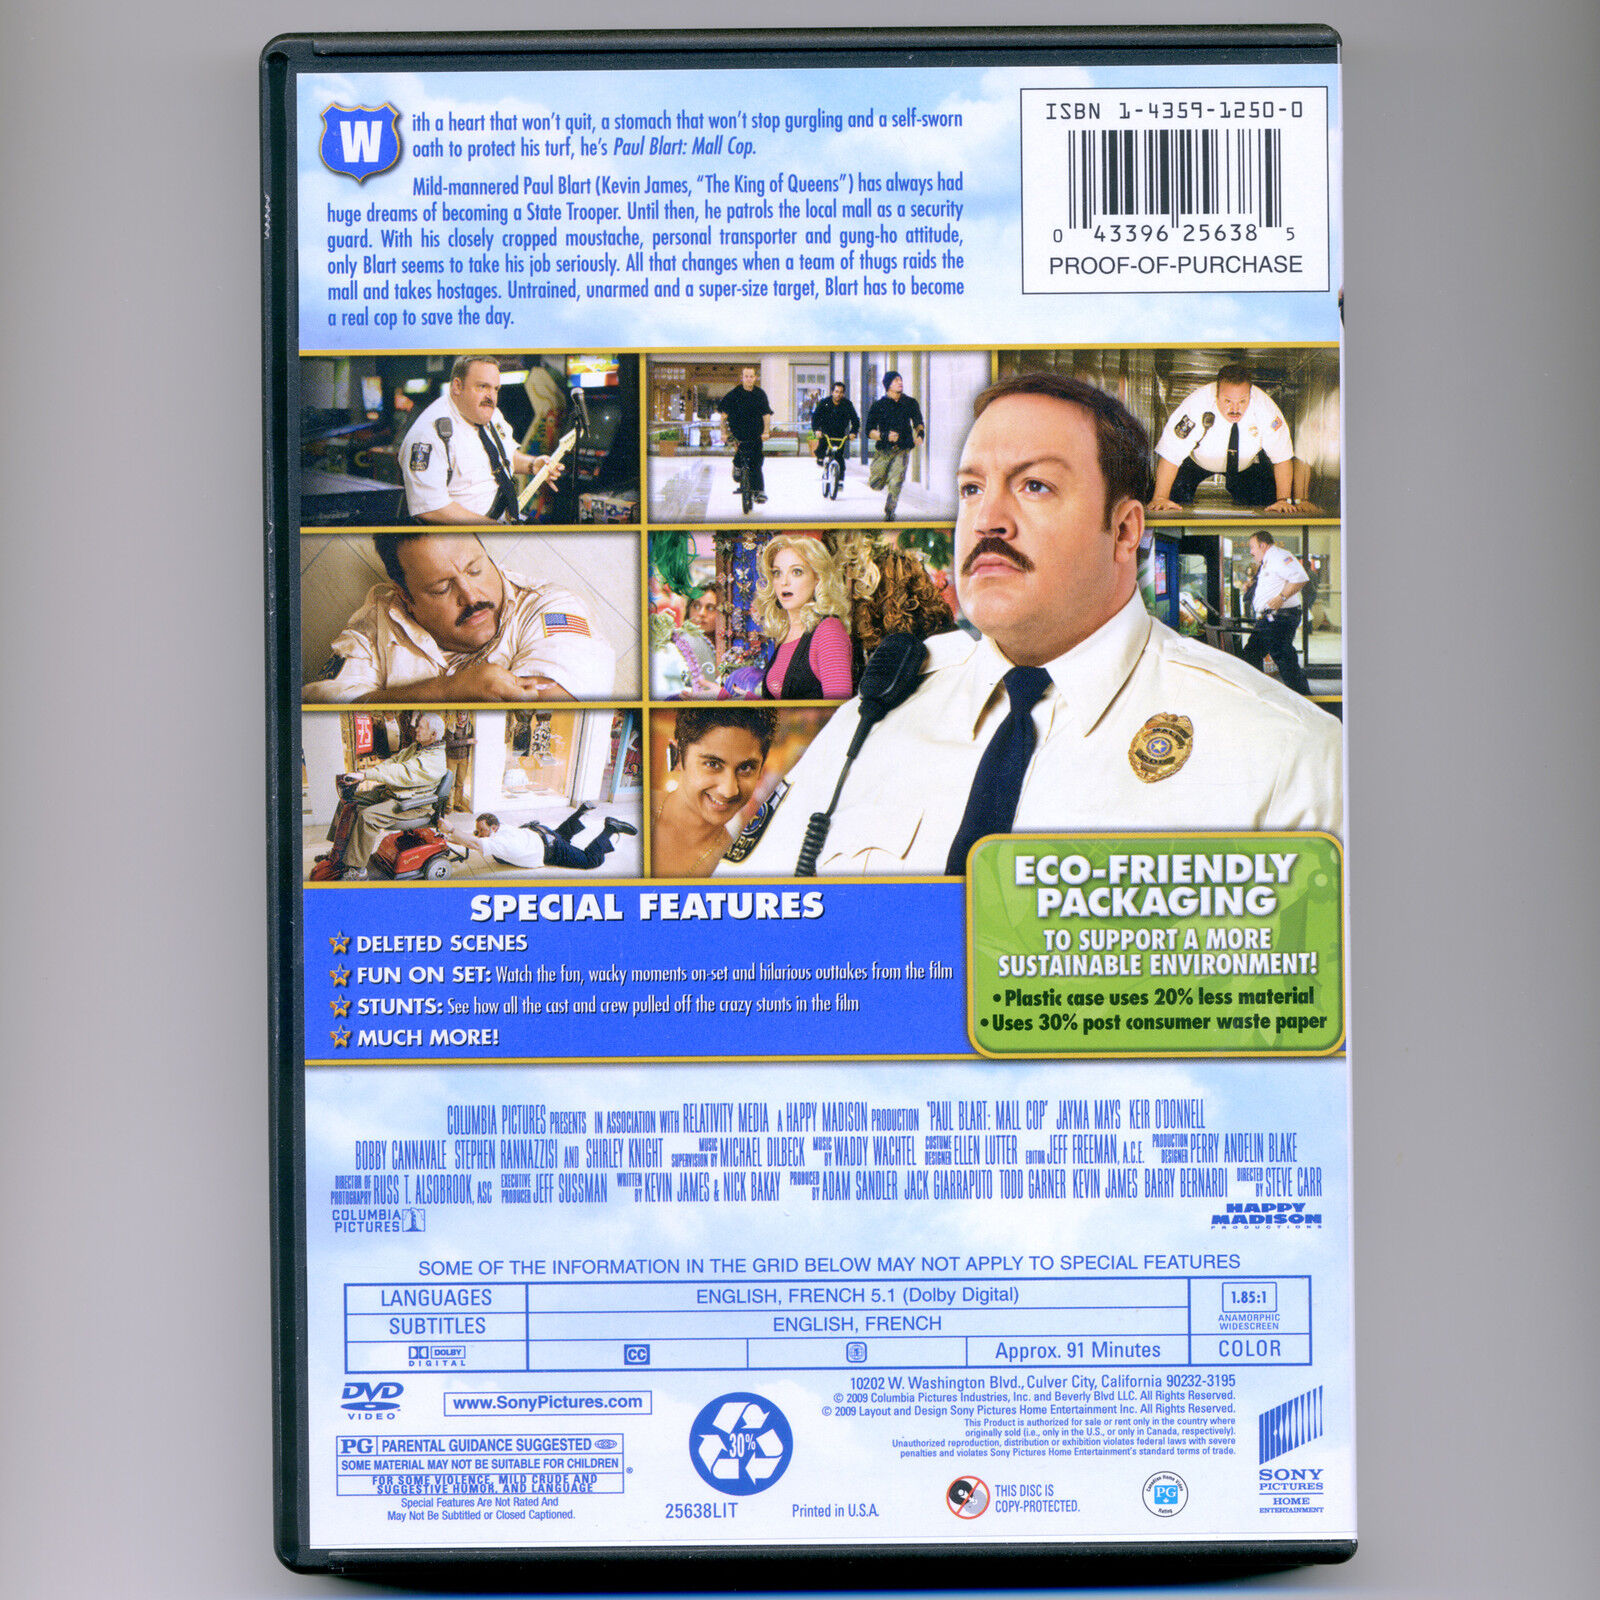 Paul Blart MALL COP 1 & 2 PG family comedy movies, new DVDs Kevin James, Segway Без бренда - фотография #2